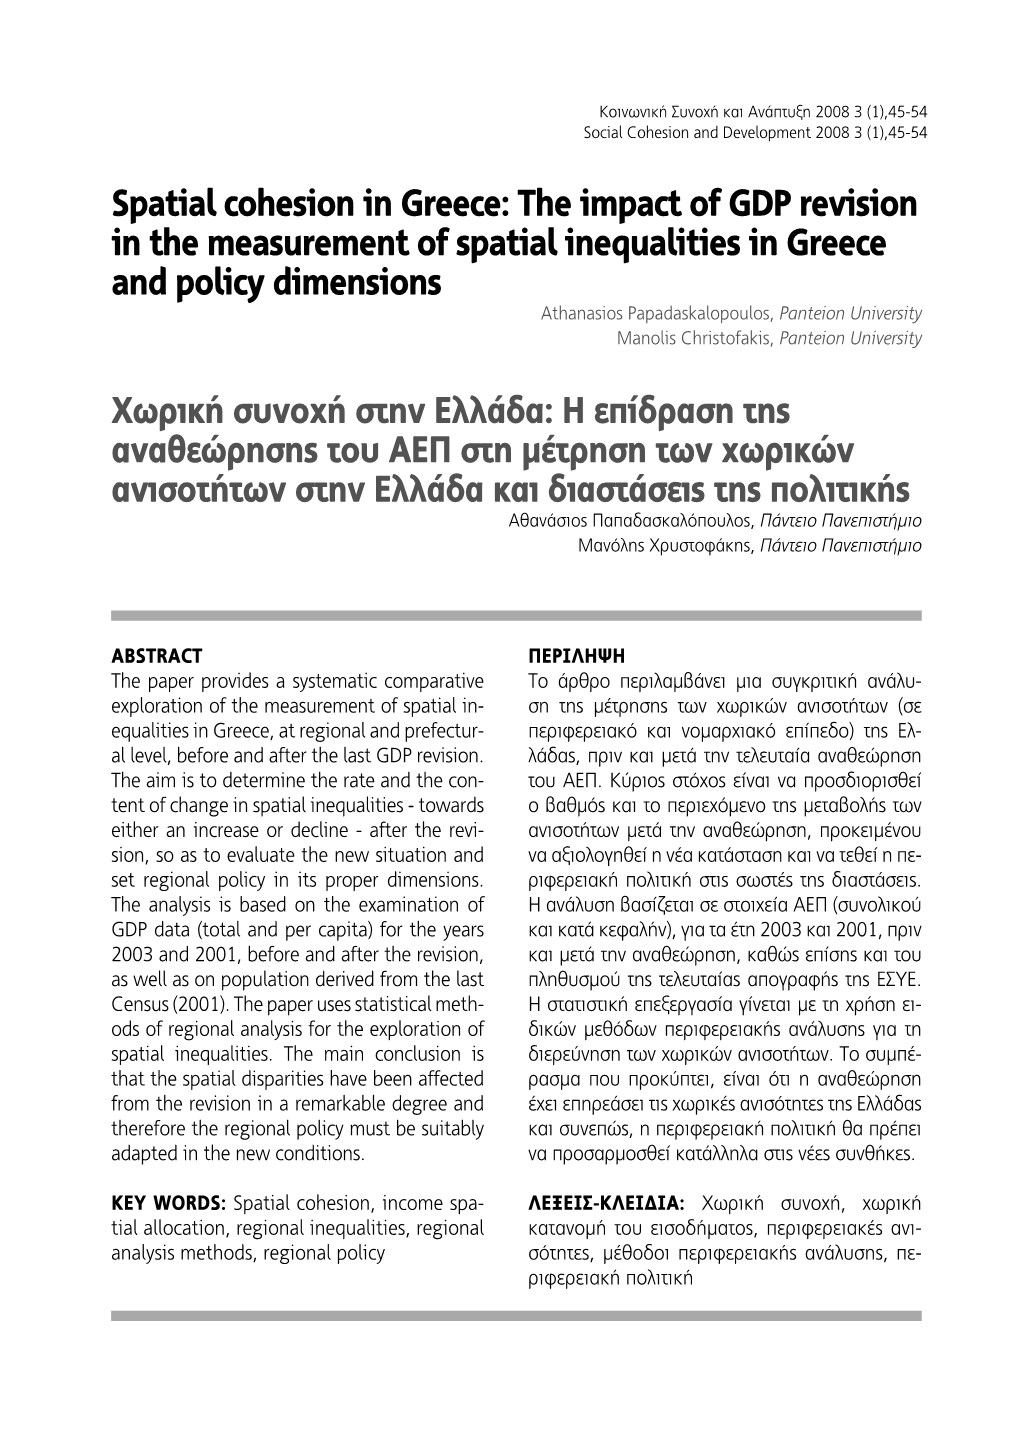 The Impact of GDP Revision in the Measurement of Spatial Inequalities